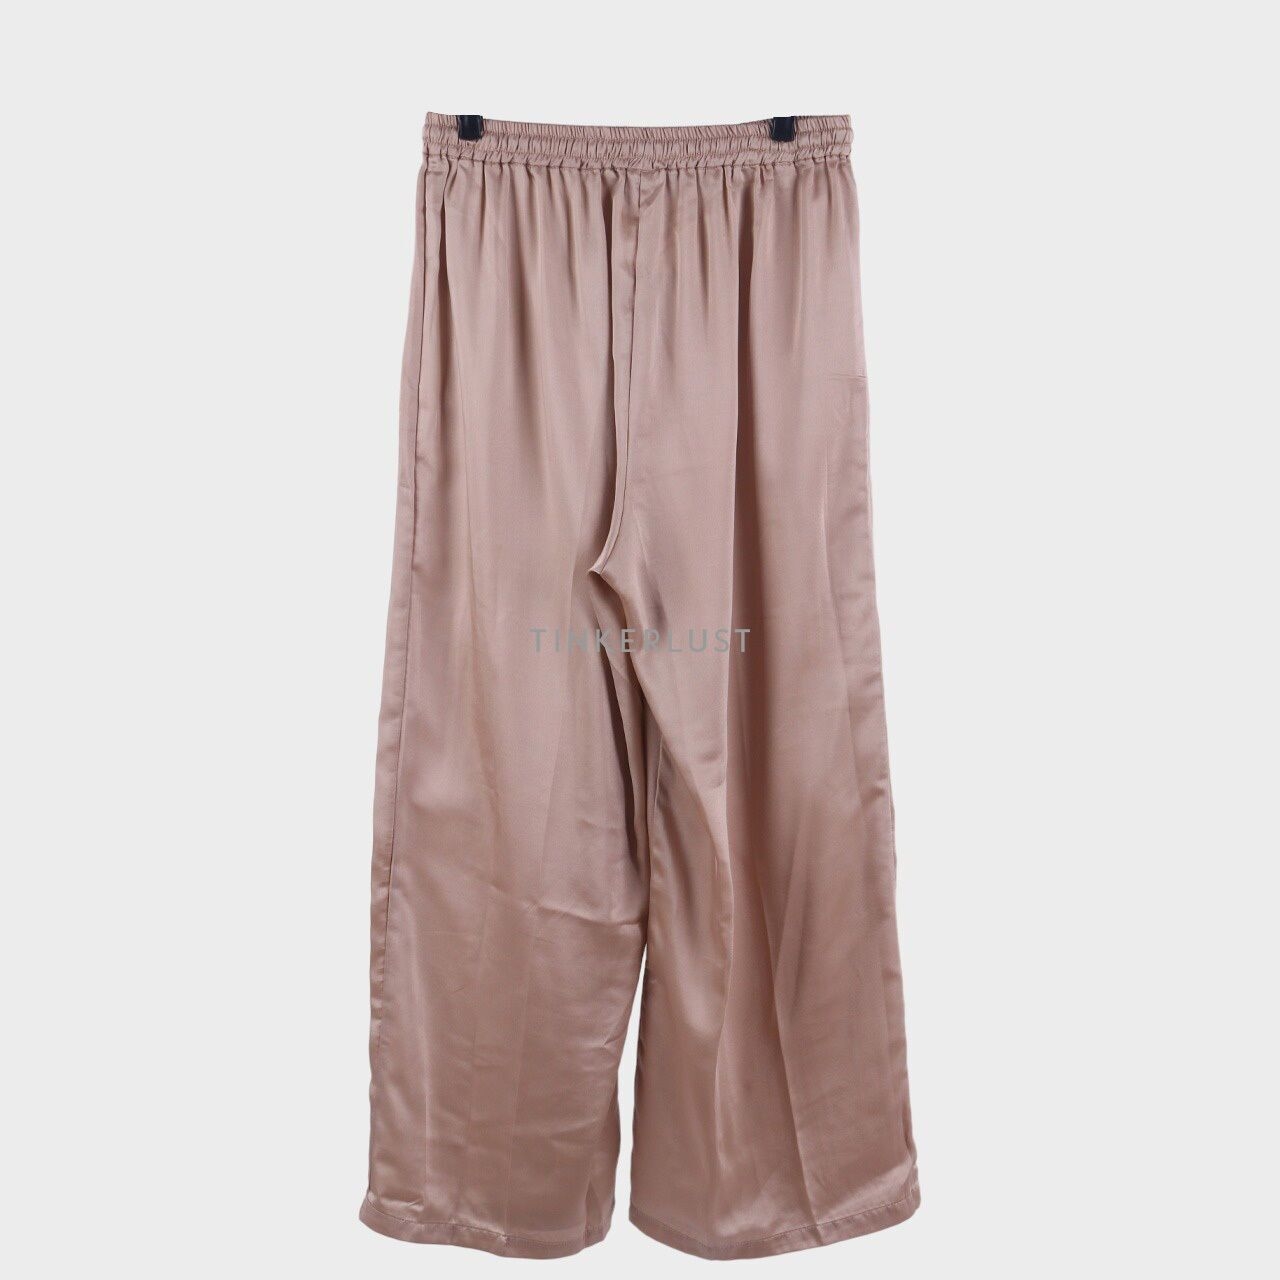 Day by love-and-flair Khaki Long Pants